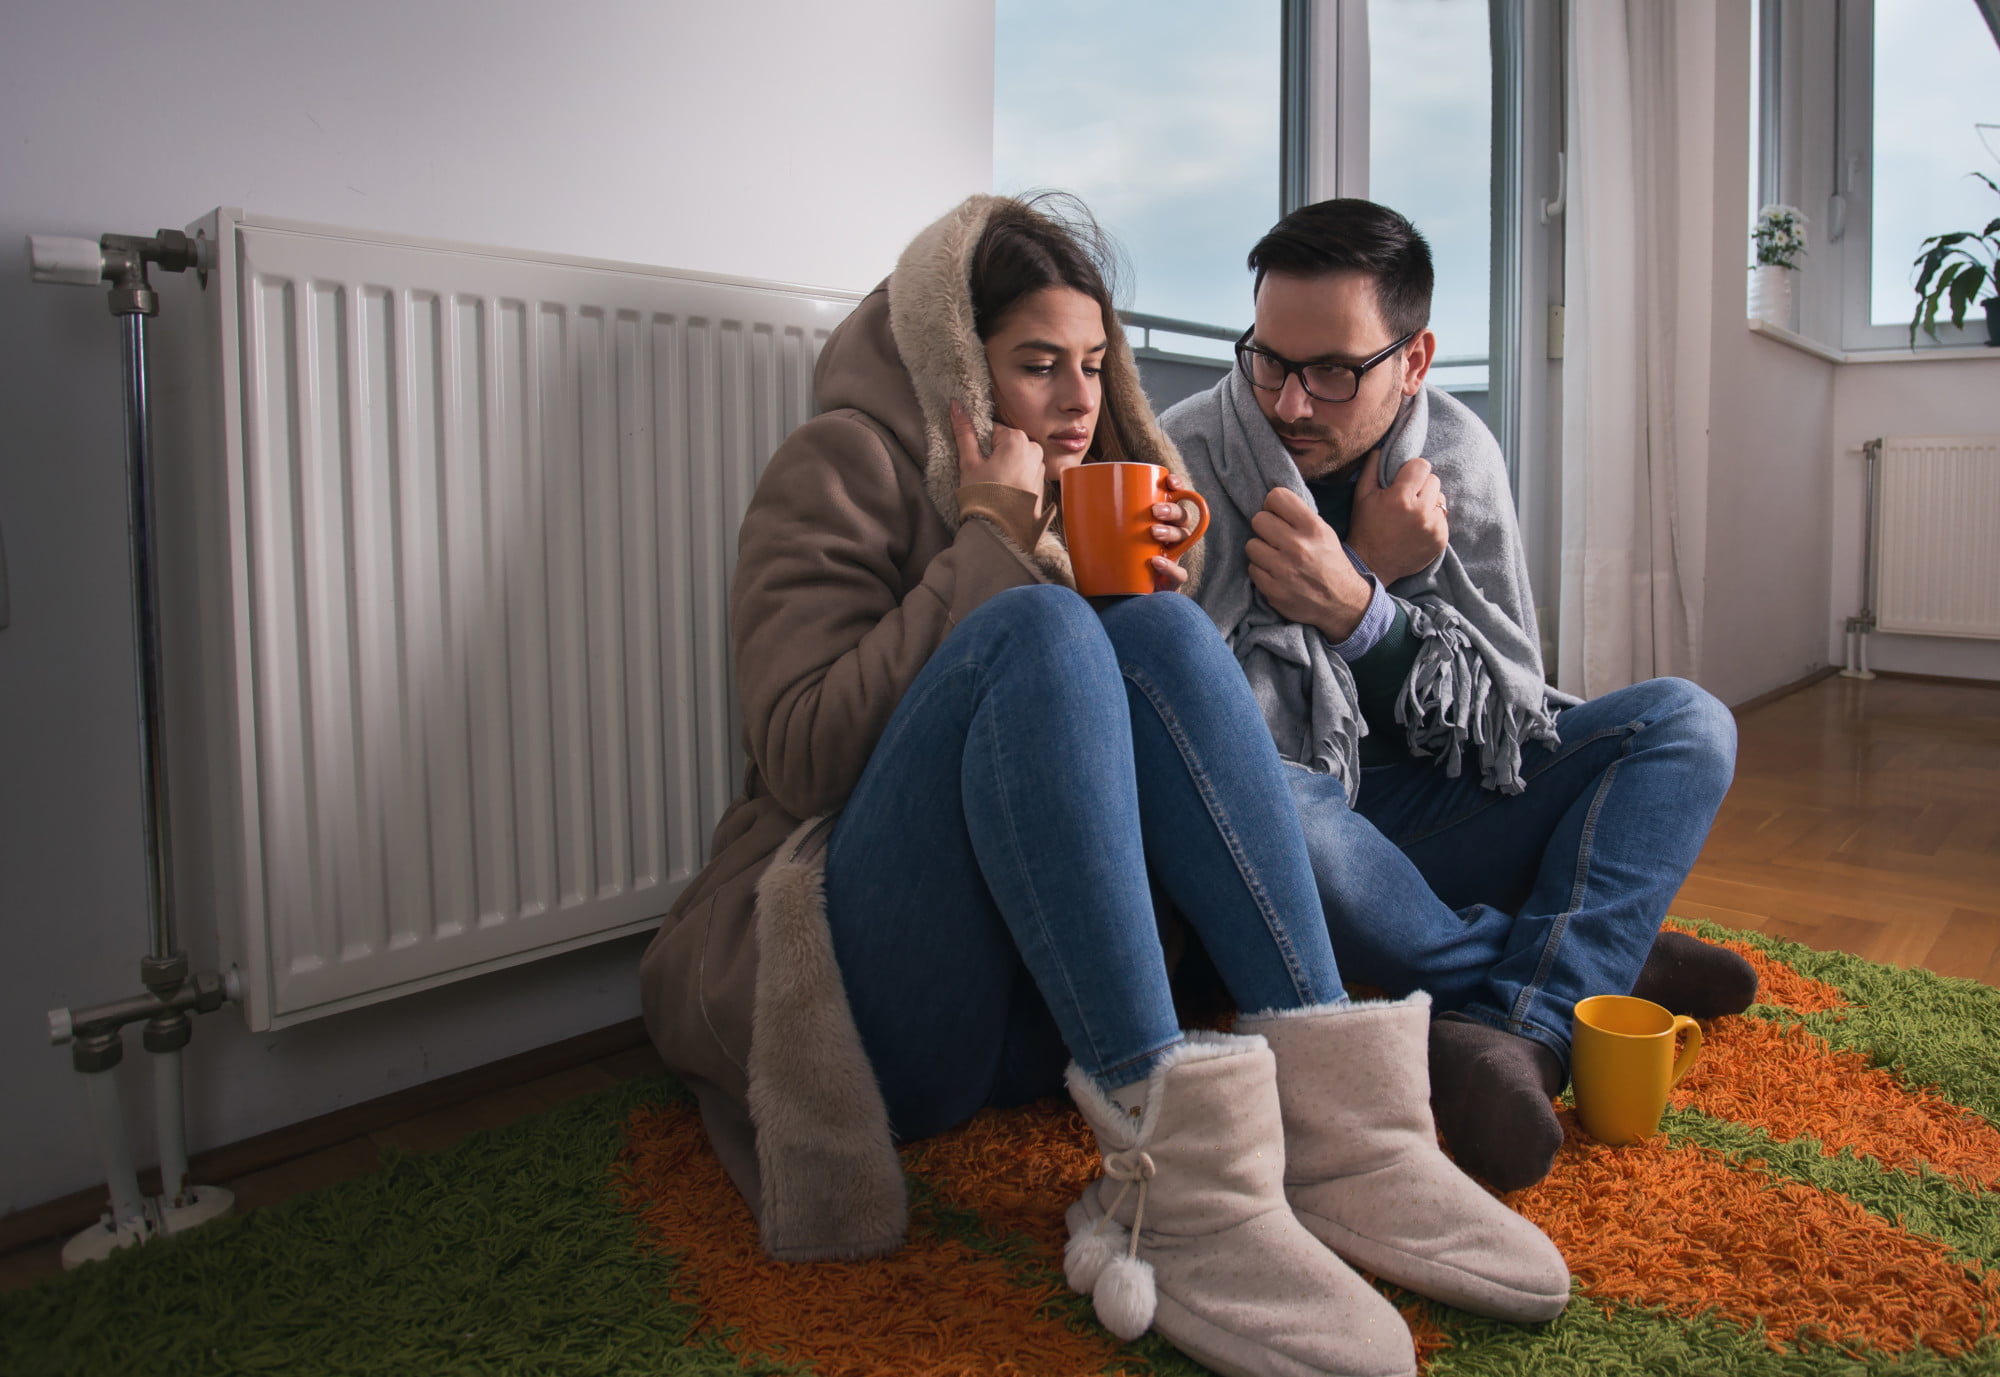 Are you wondering if your heater needs to be repaired? Click here for five telltale signs you definitely need to hire heater repair services.